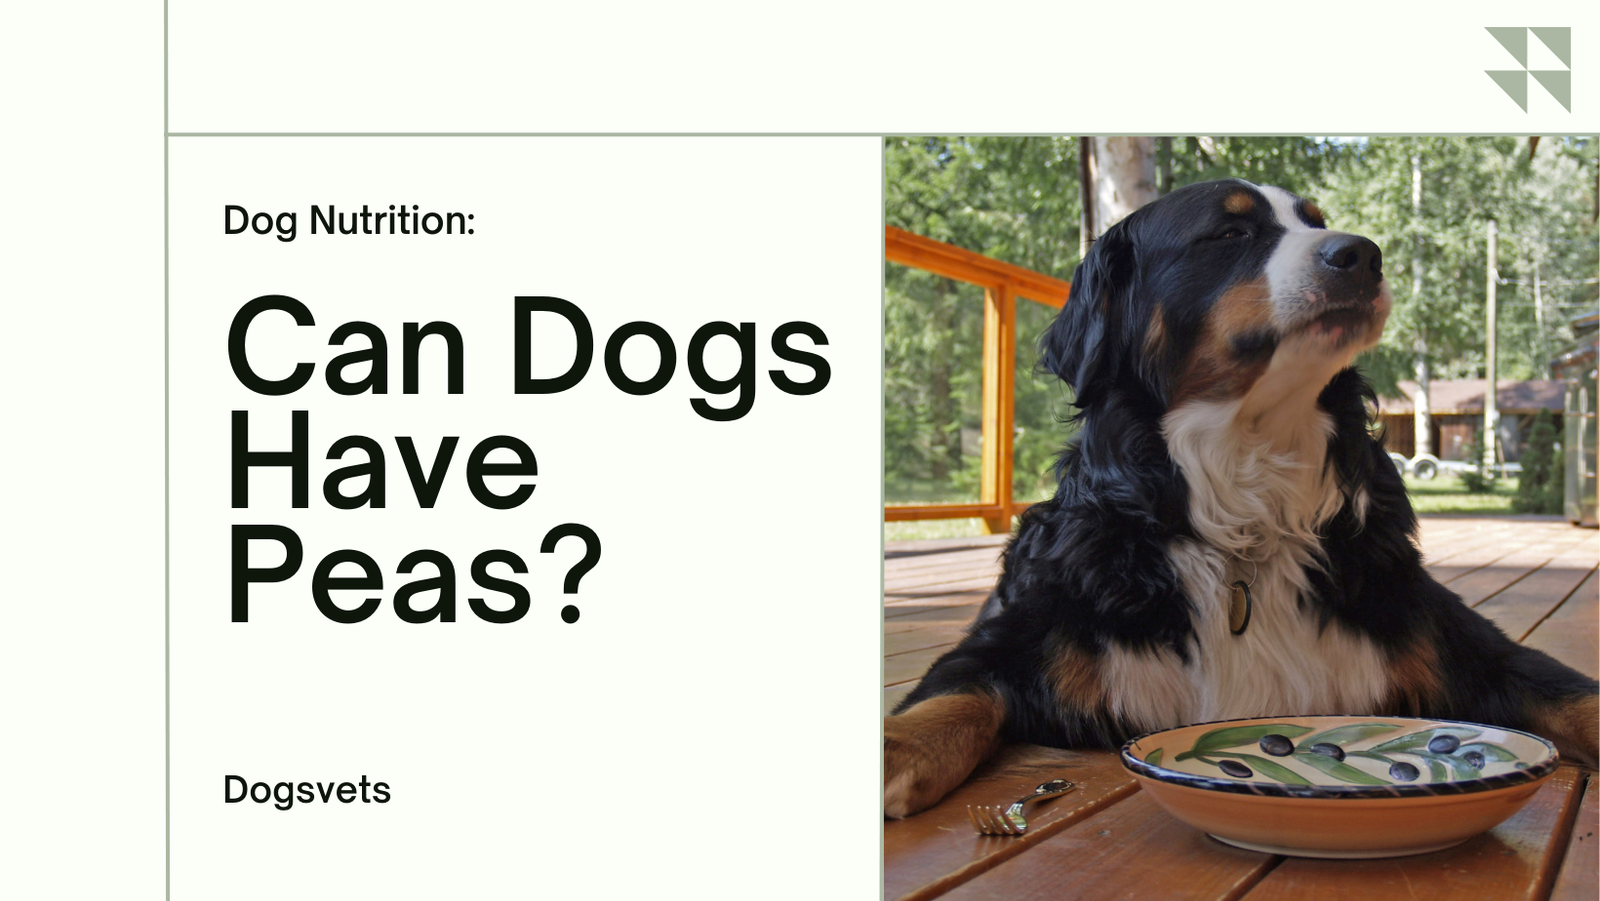 Can Dogs Have Peas? 